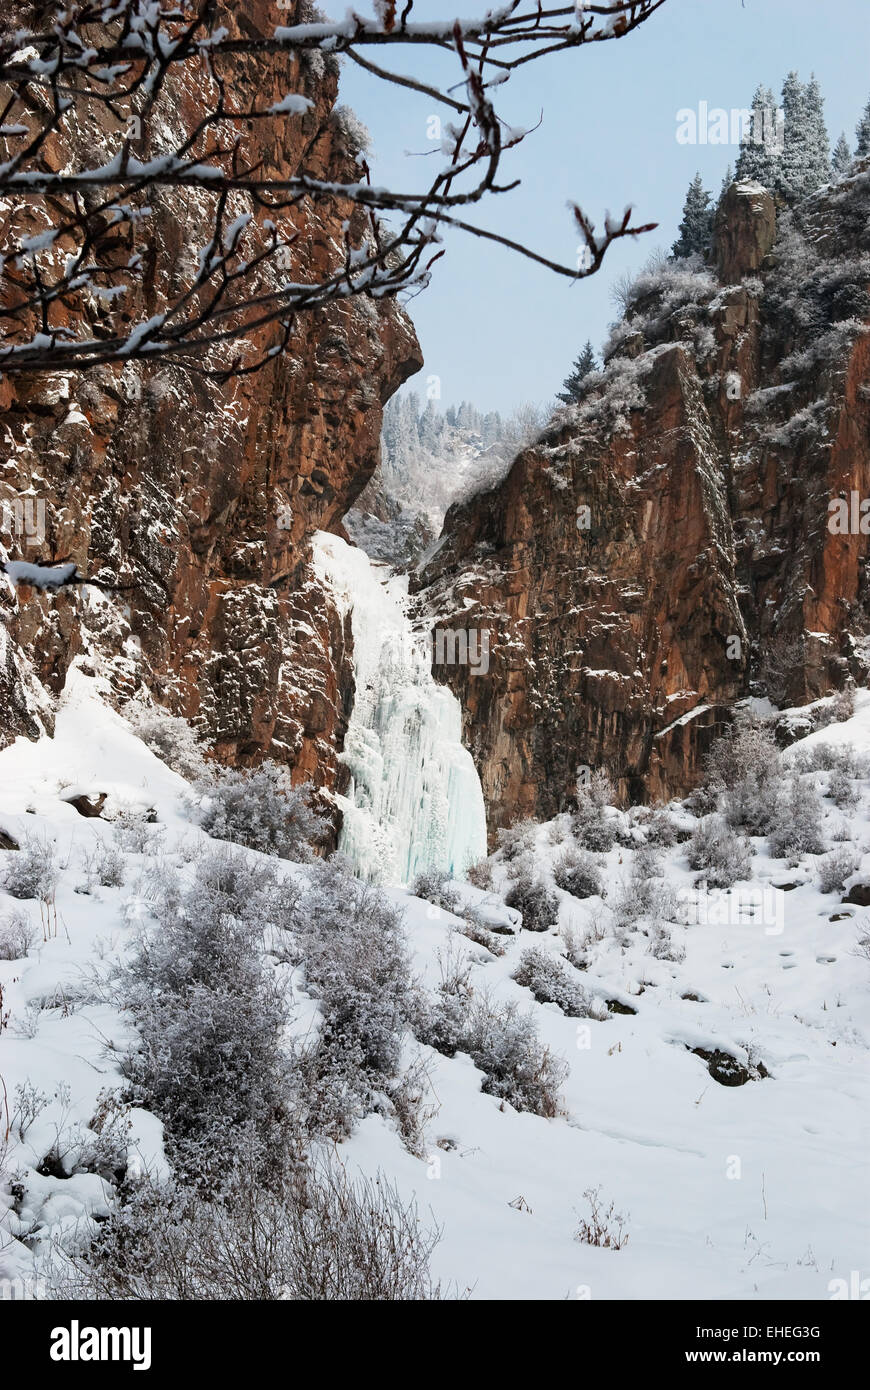 Rocks and icefall in mountains Stock Photo